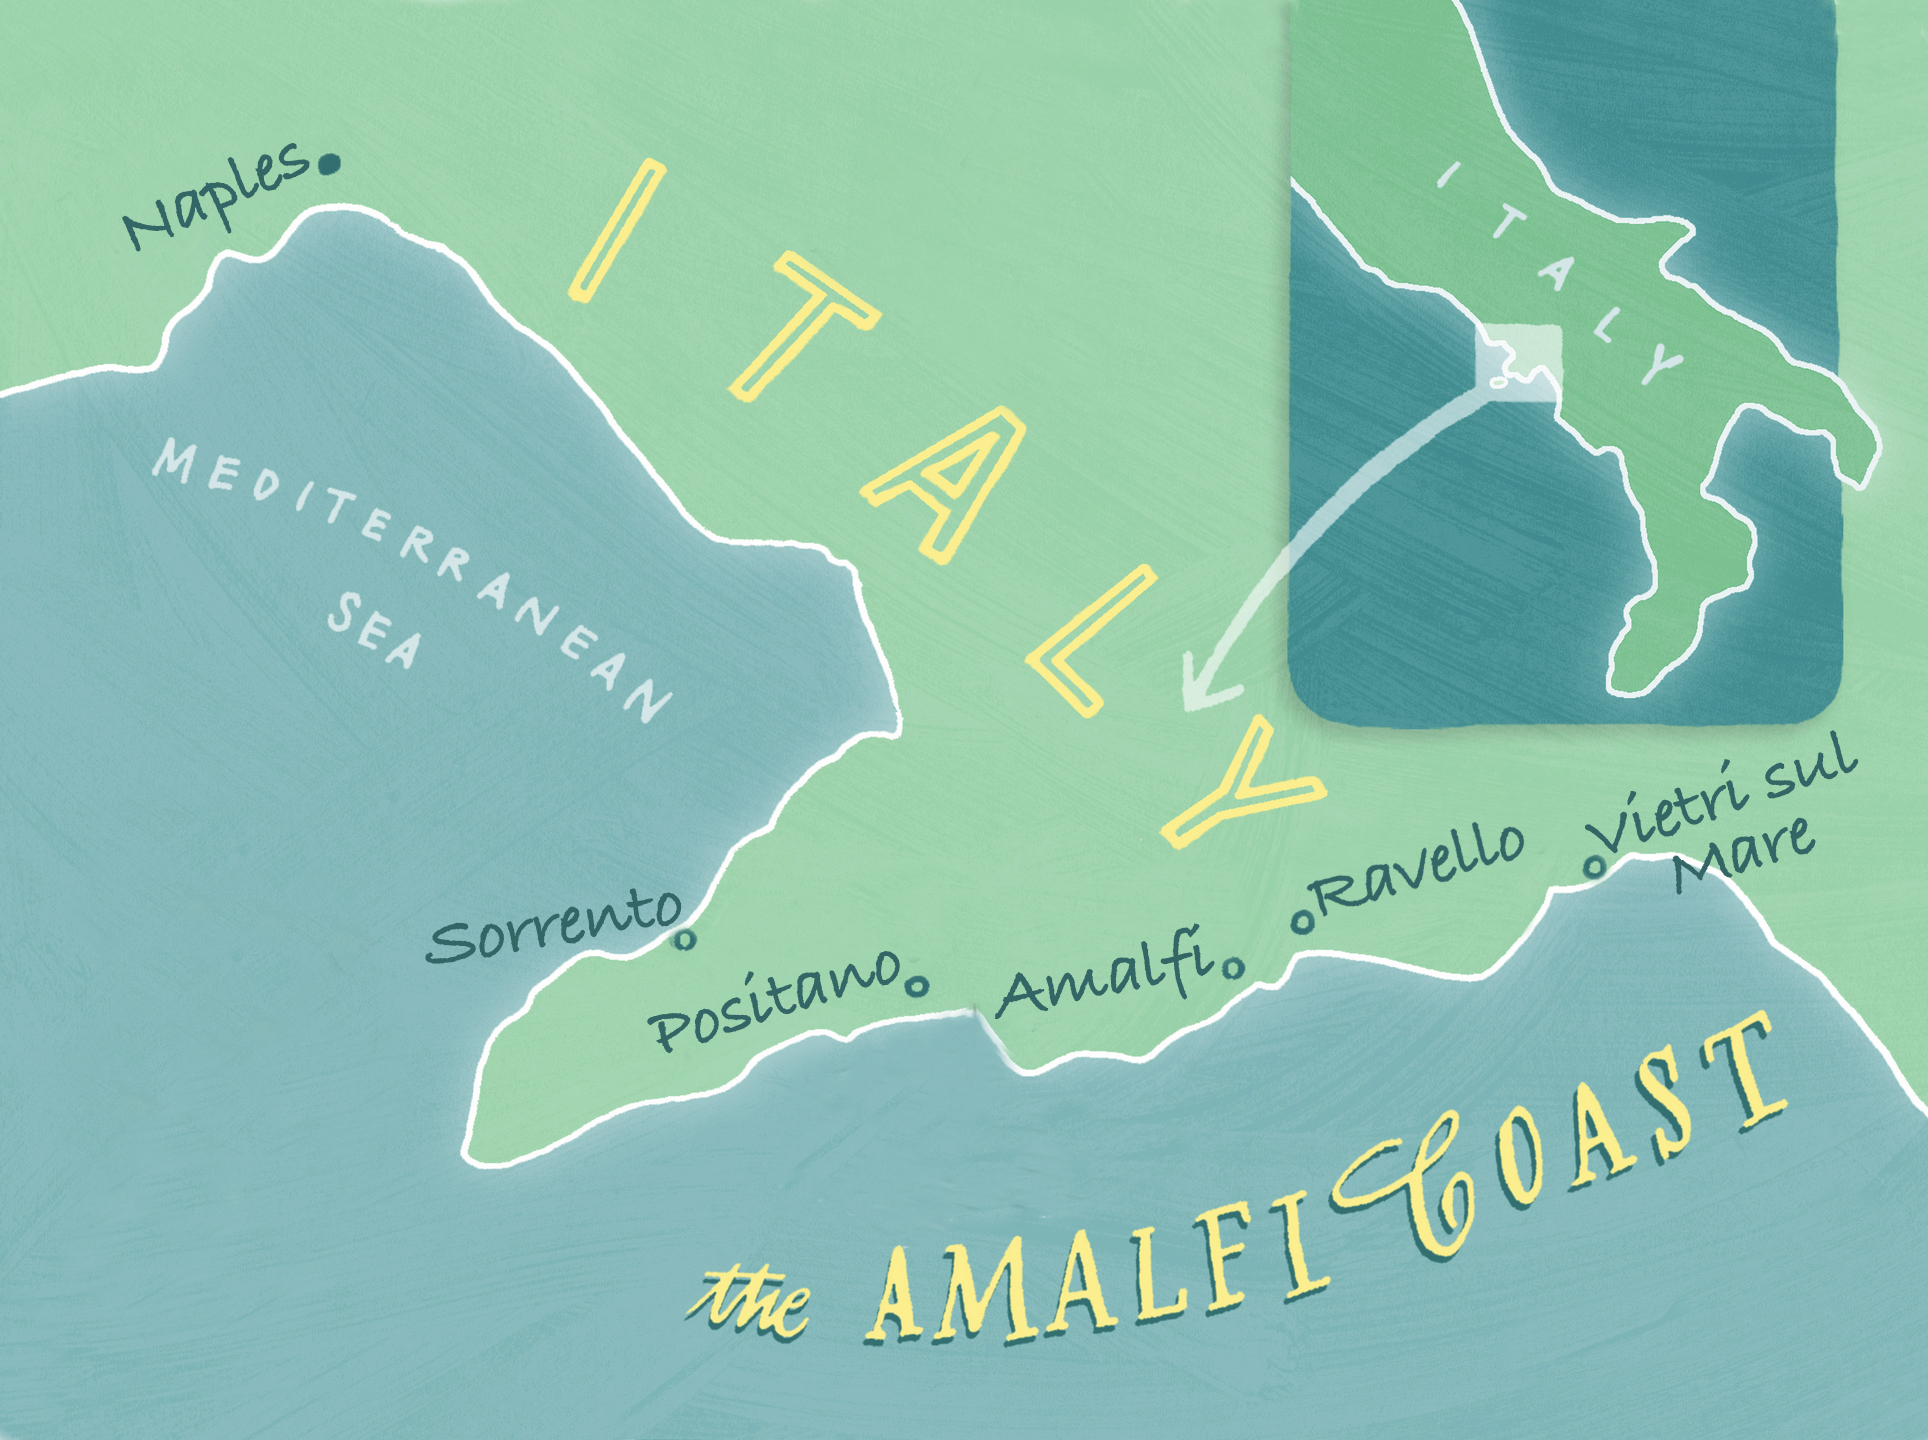 Map of Amalfi Coast (origin of this image is unknown)